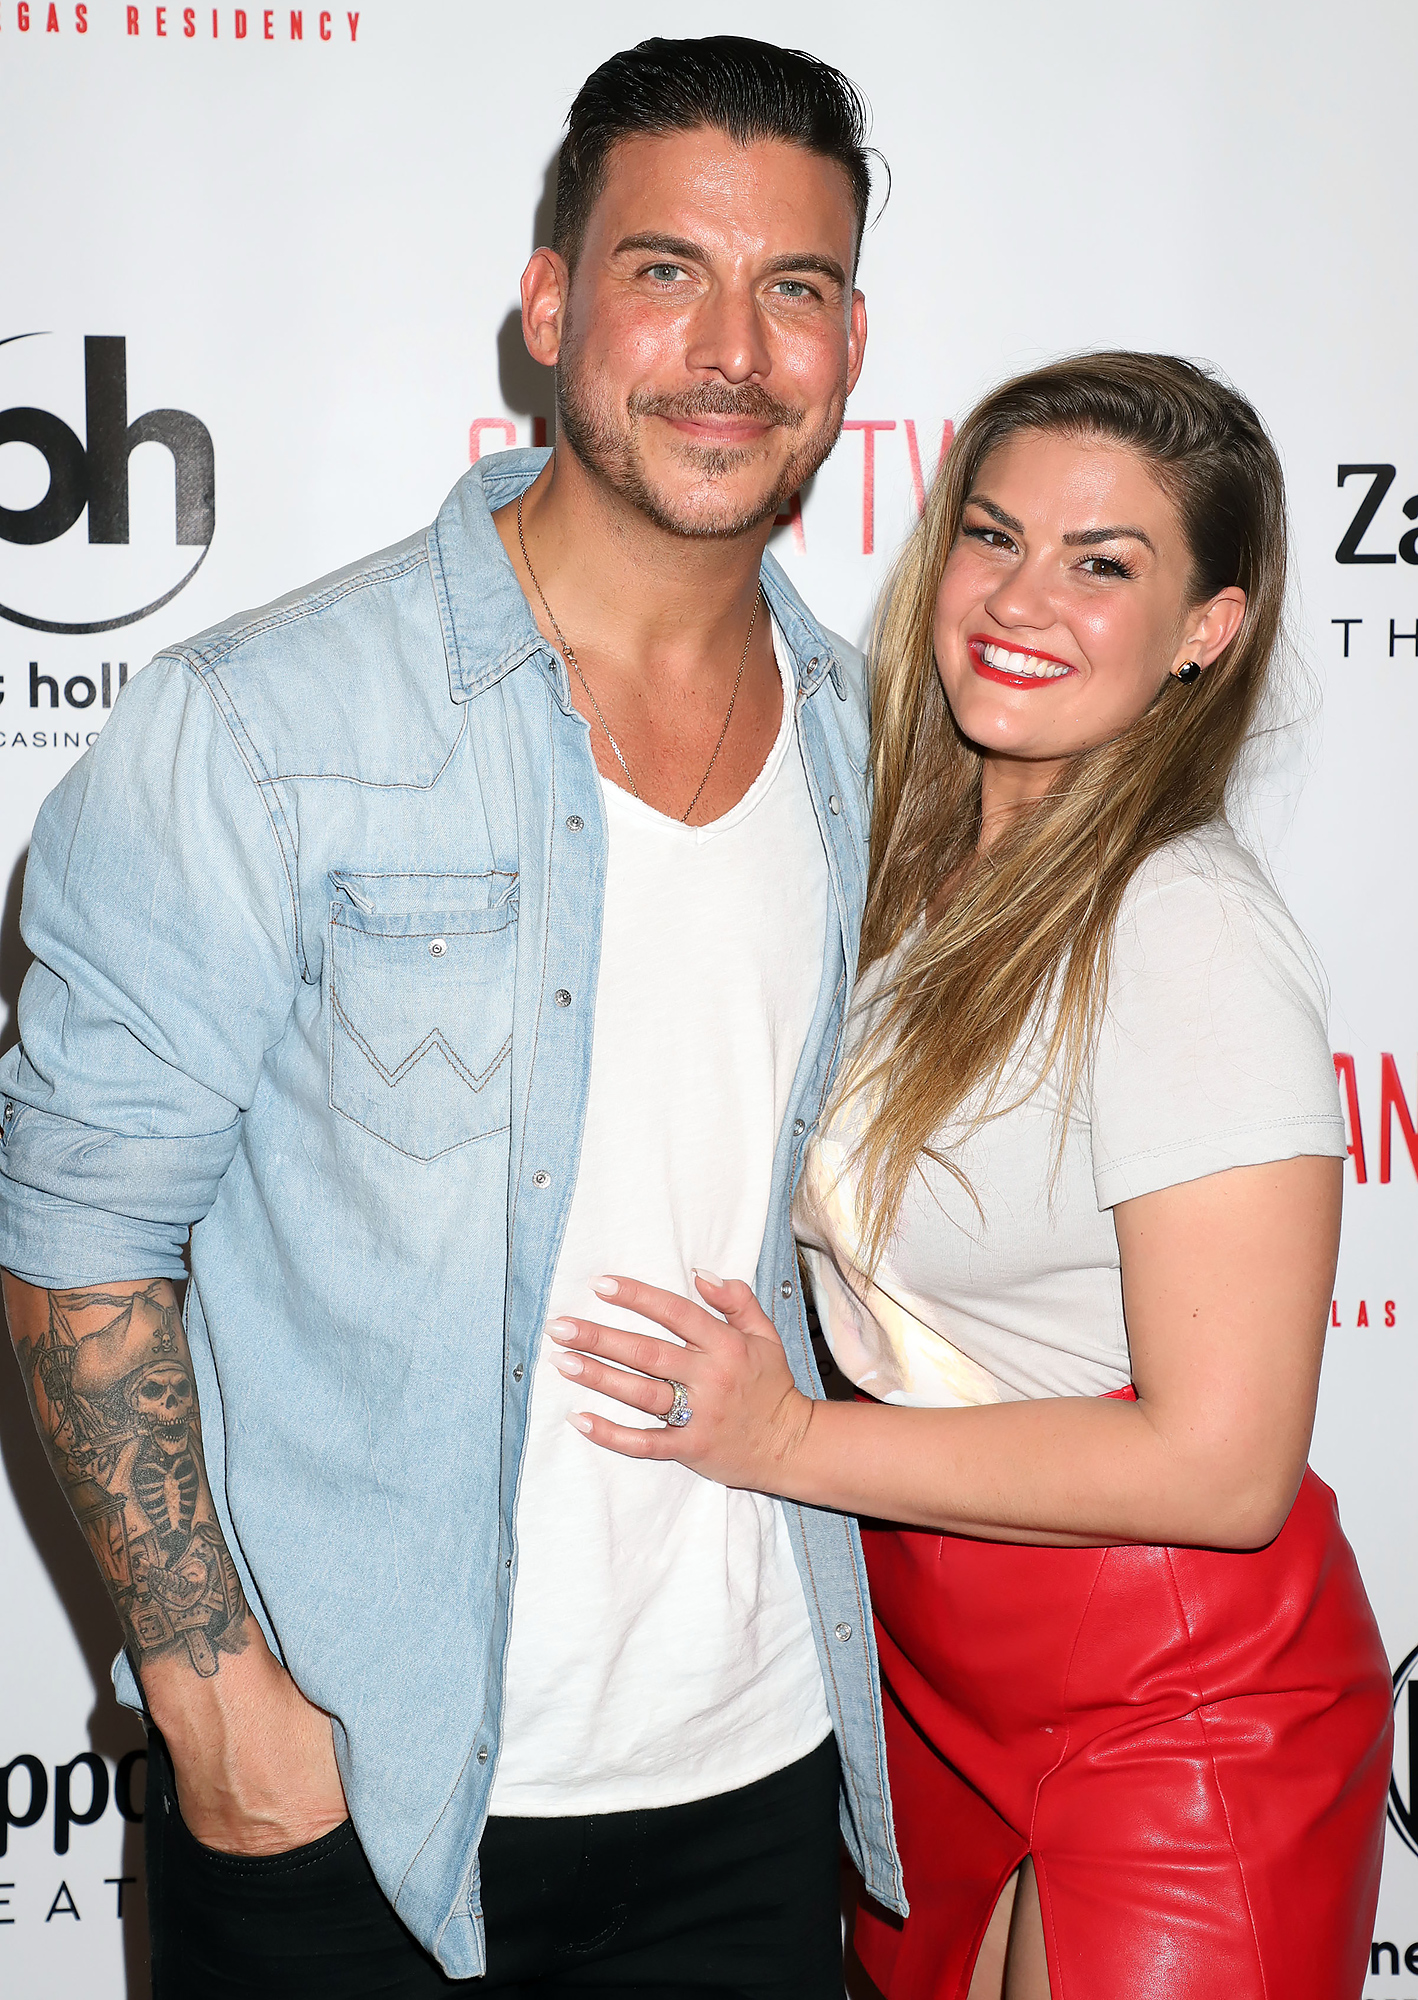 Jax Taylor And Brittany Cartwrights Ups And Downs Over The Years